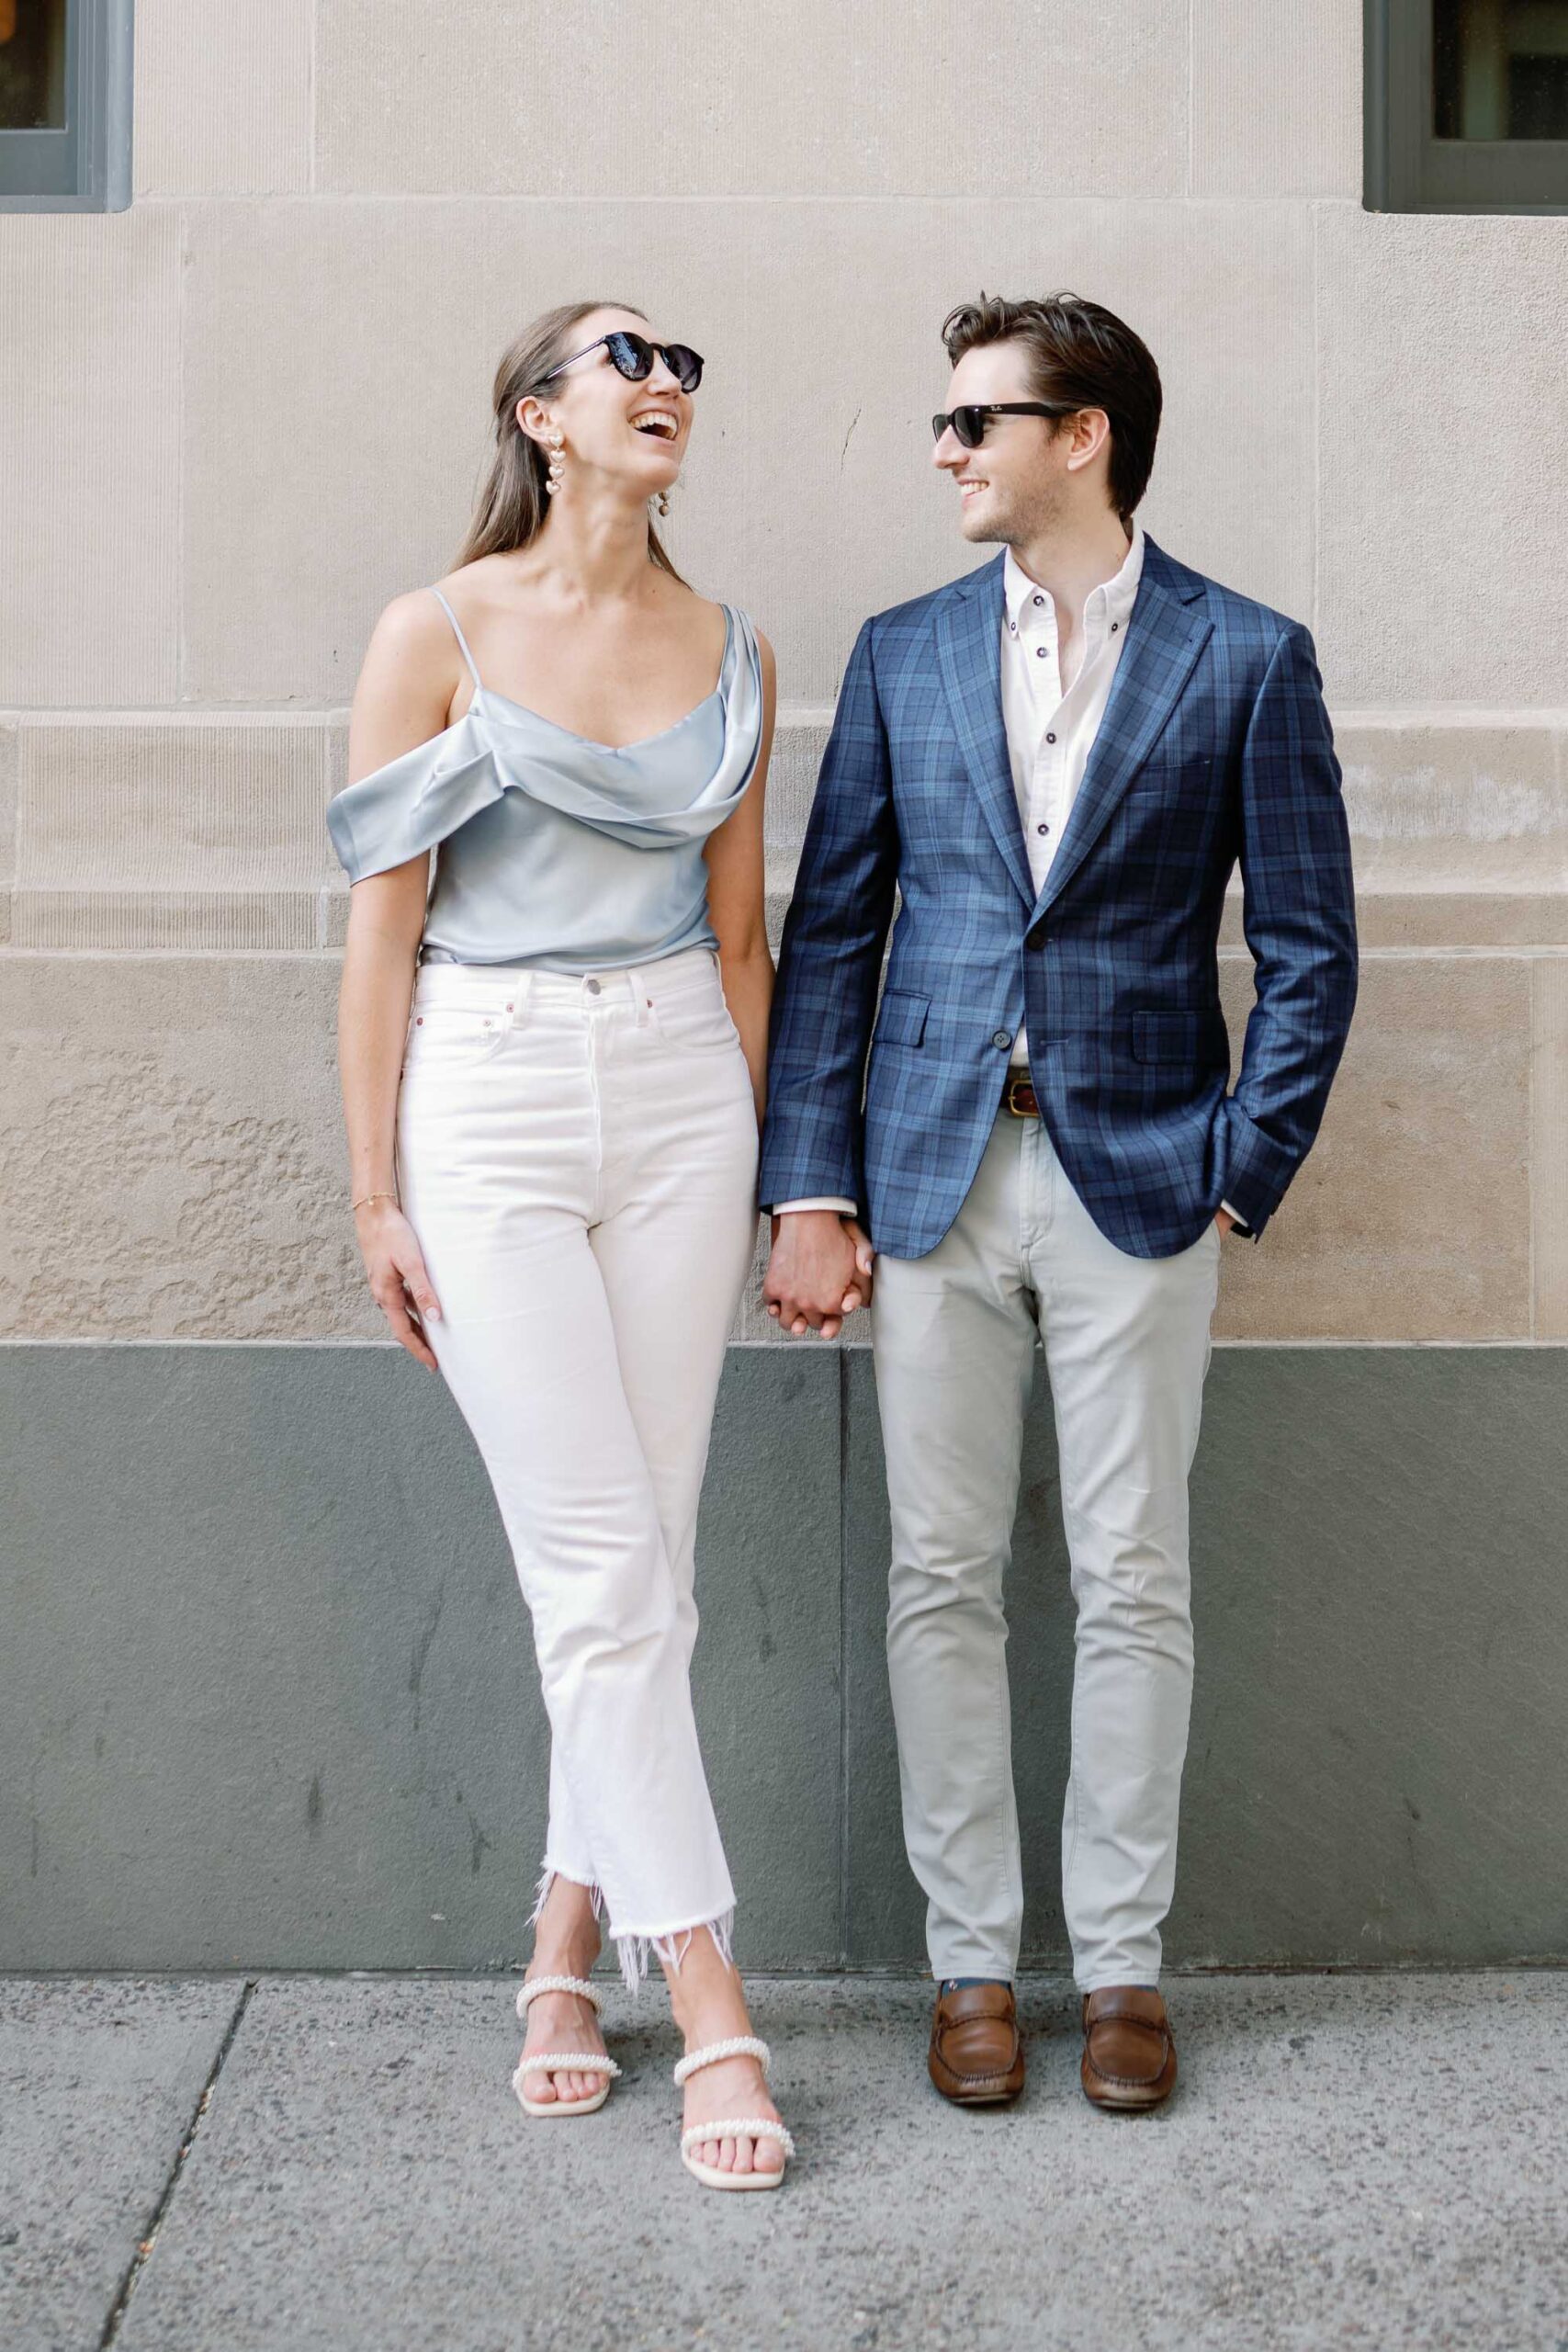 chic nyc west village engagement outfits with sunglasses